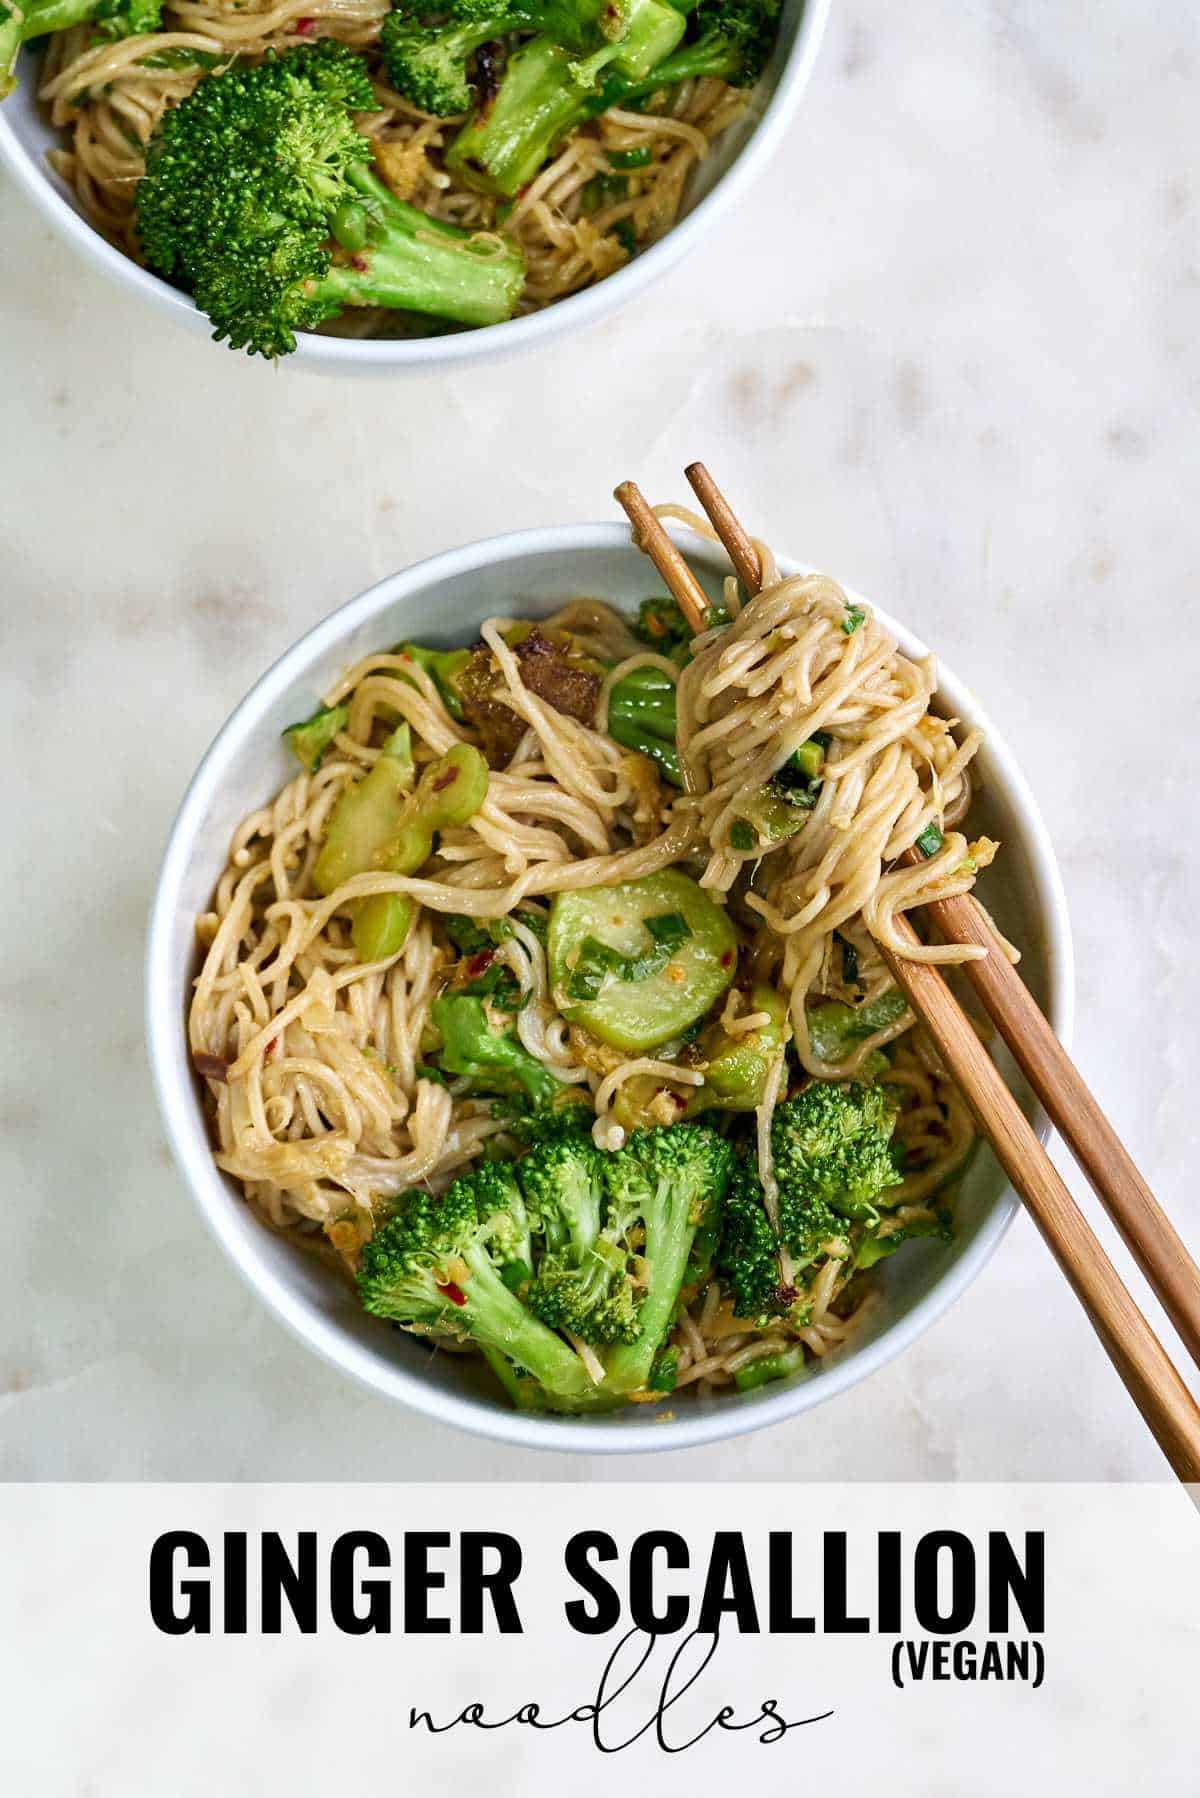 Ginger Scallion Noodle Stir Fry with Broccoli | Vegan - Proportional Plate